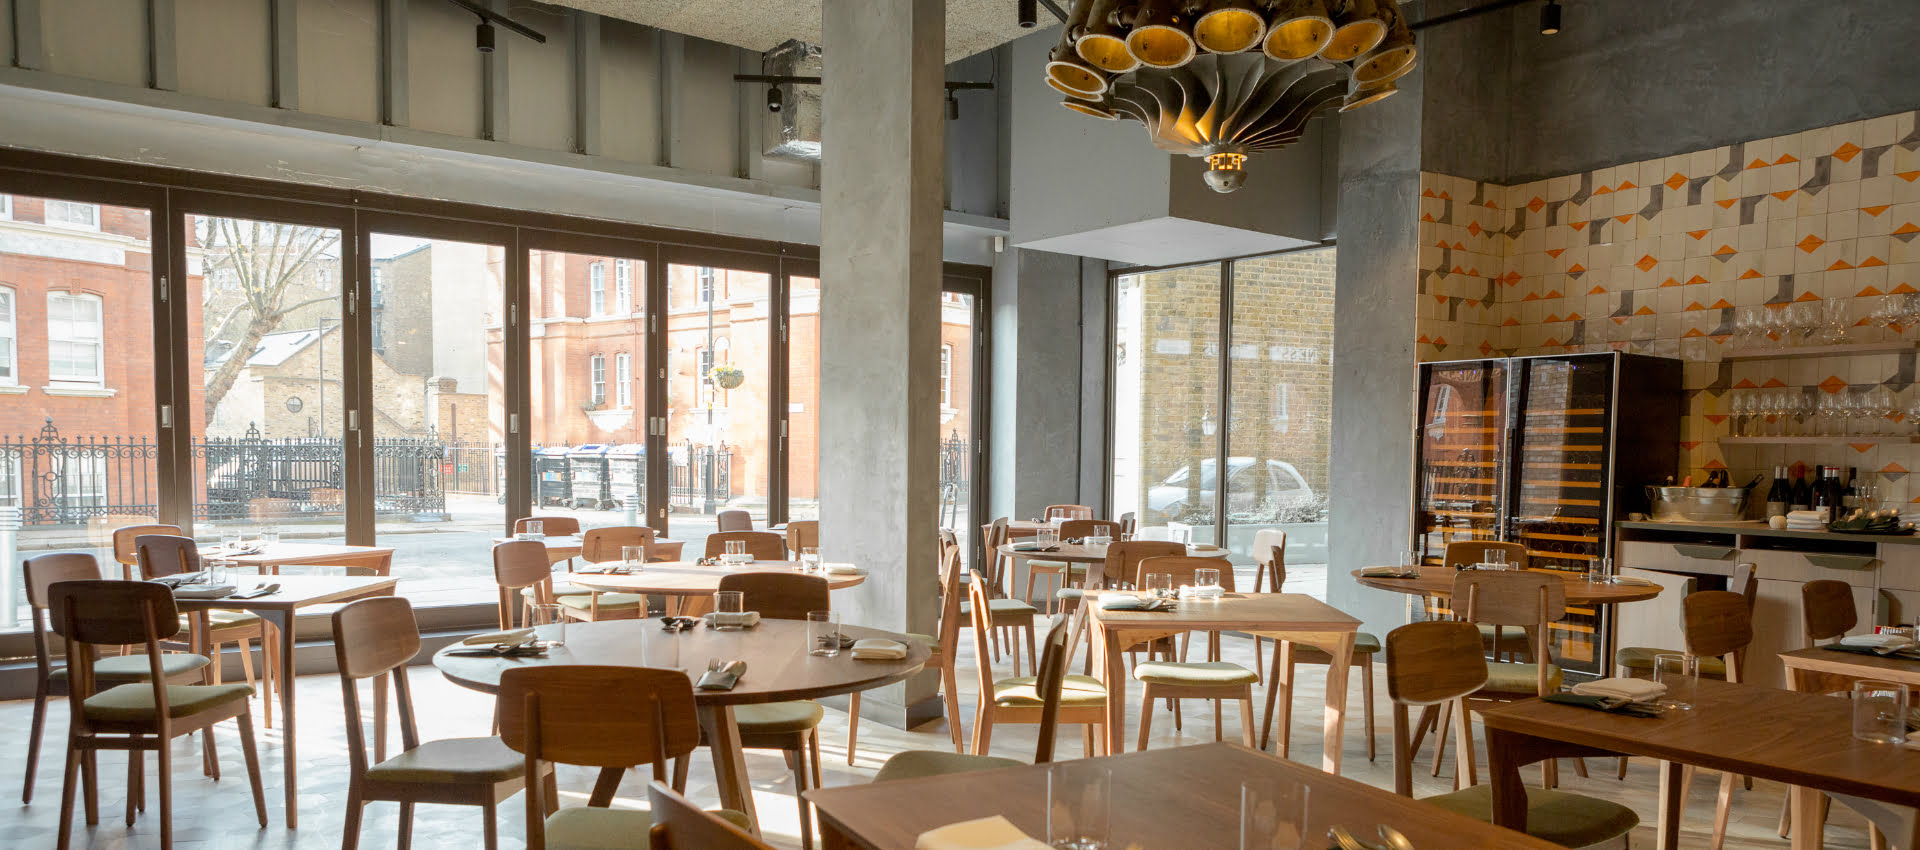 Trivet | The Fat Duck's executive chef finally opens his own spot